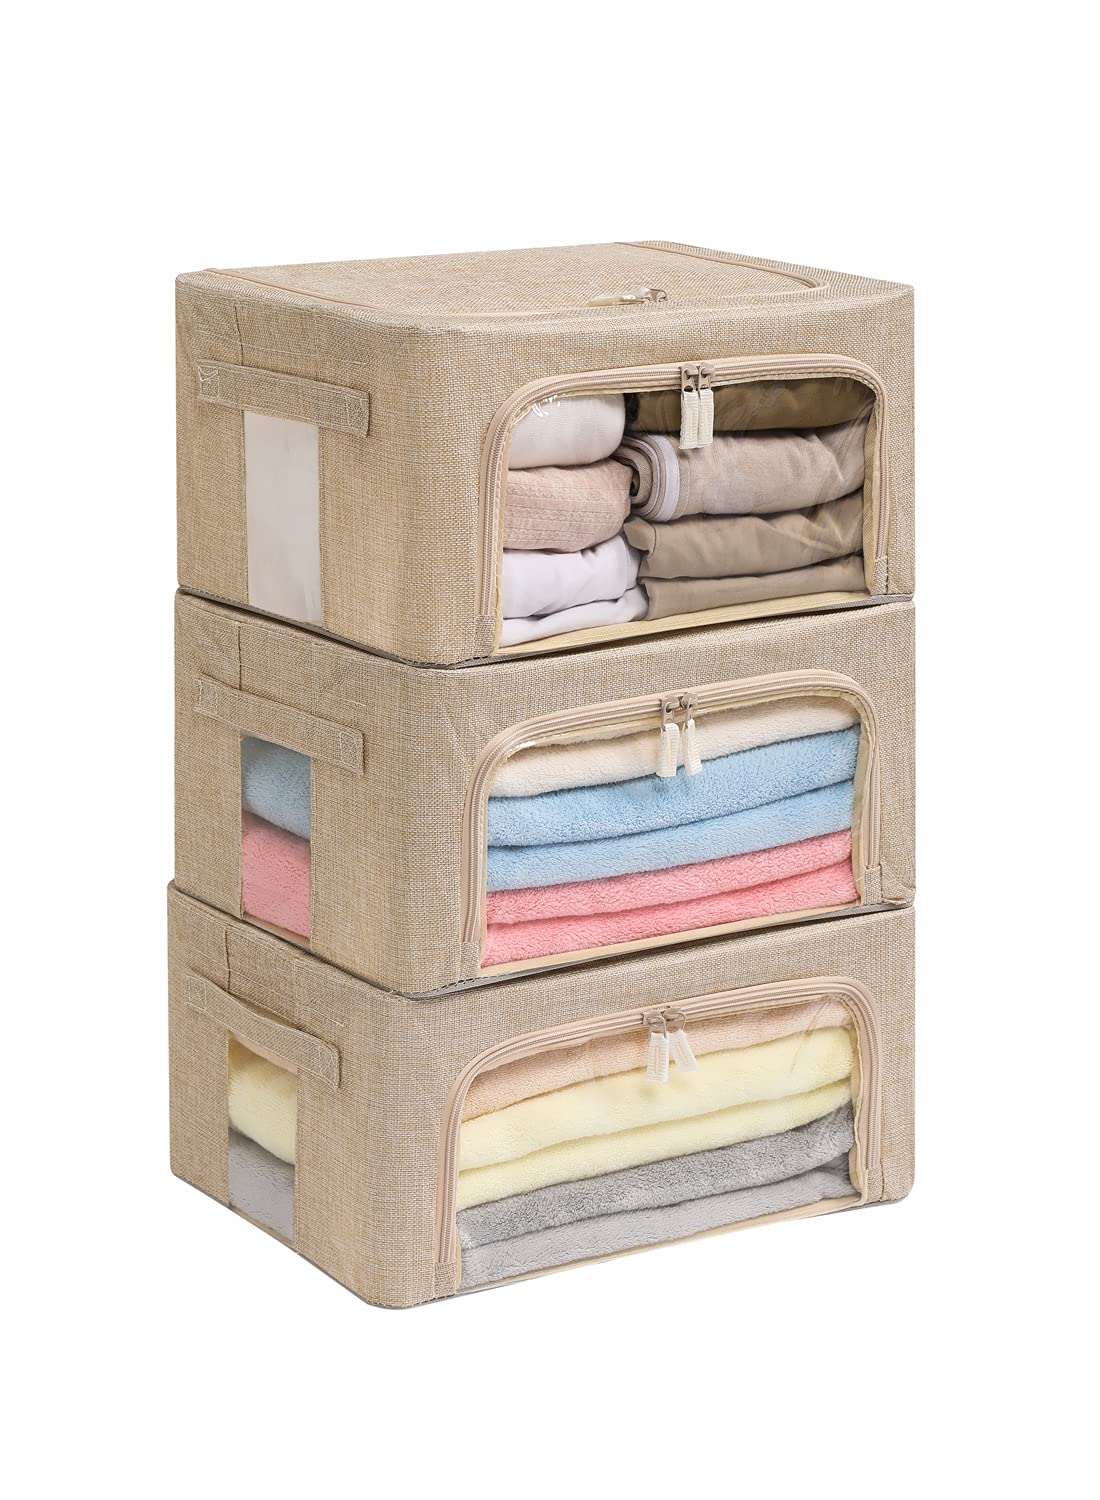 3Pack Foldable Storage Bins - Frame Storage Box Linen Fabric Stackable Clothes Container Organizer with Clear Window & Carry Handles Large Capacity...